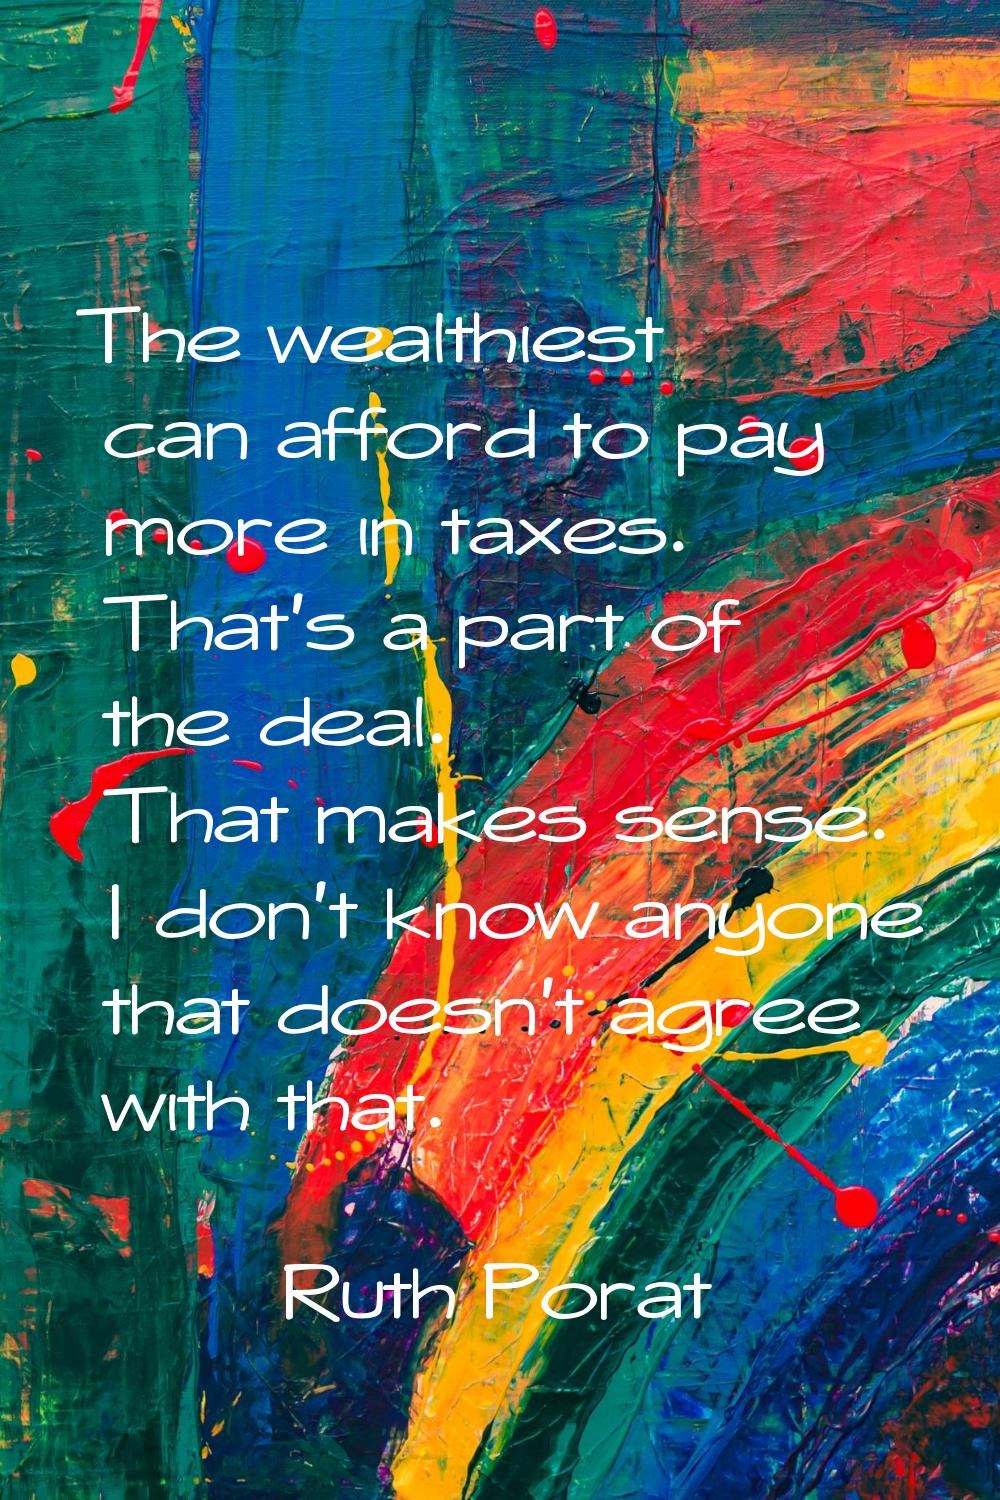 The wealthiest can afford to pay more in taxes. That's a part of the deal. That makes sense. I don'